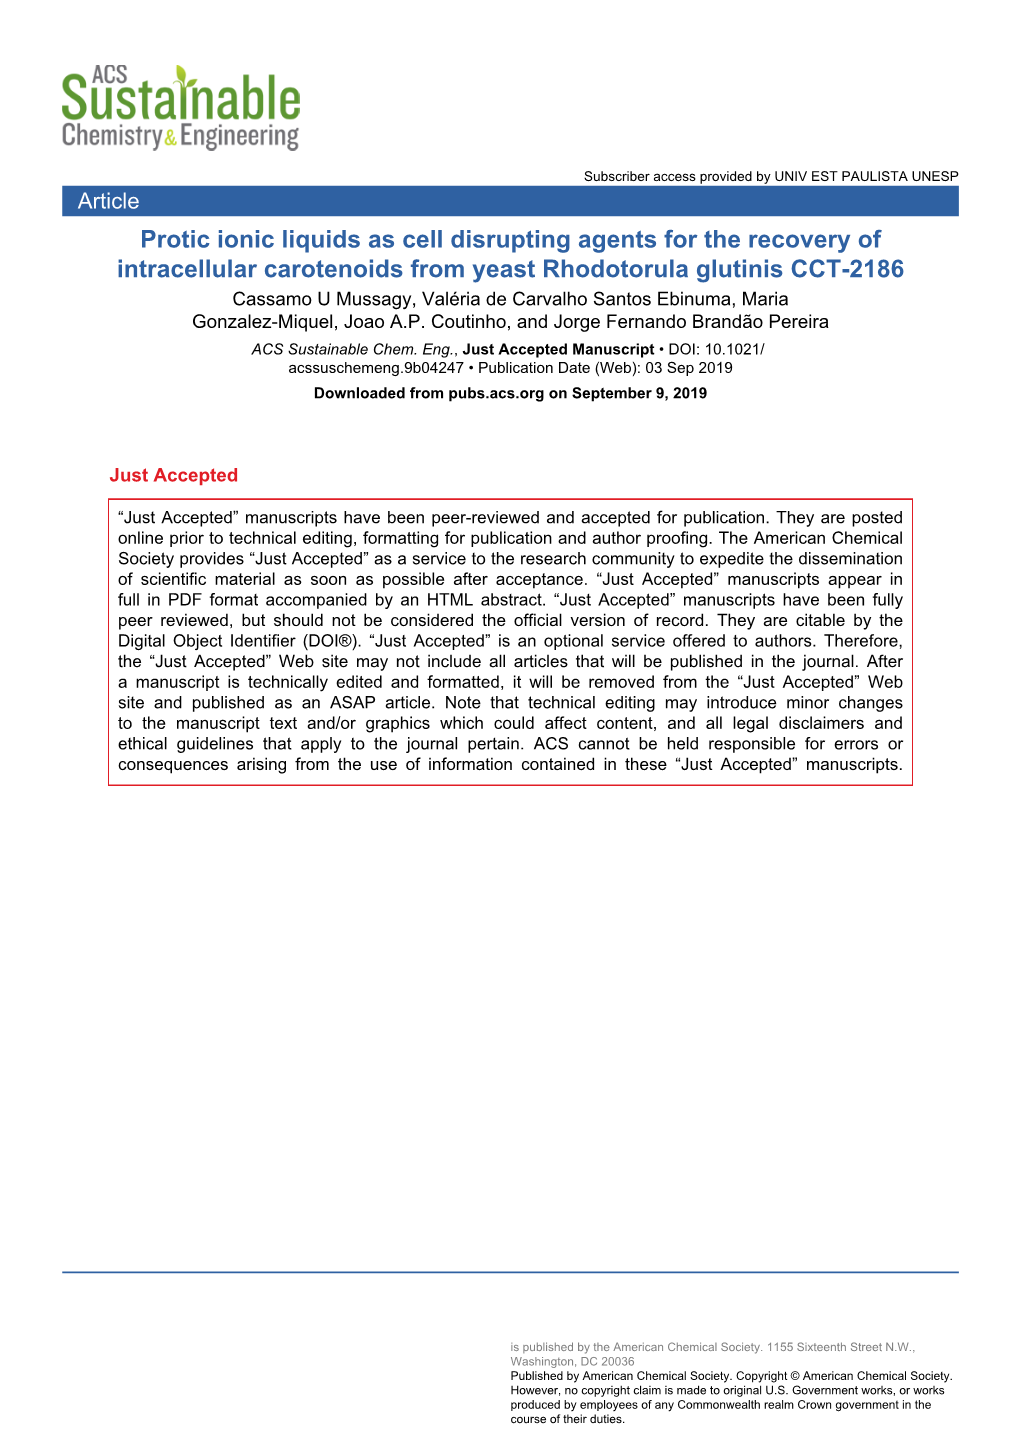 Protic Ionic Liquids As Cell Disrupting Agents for the Recovery Of